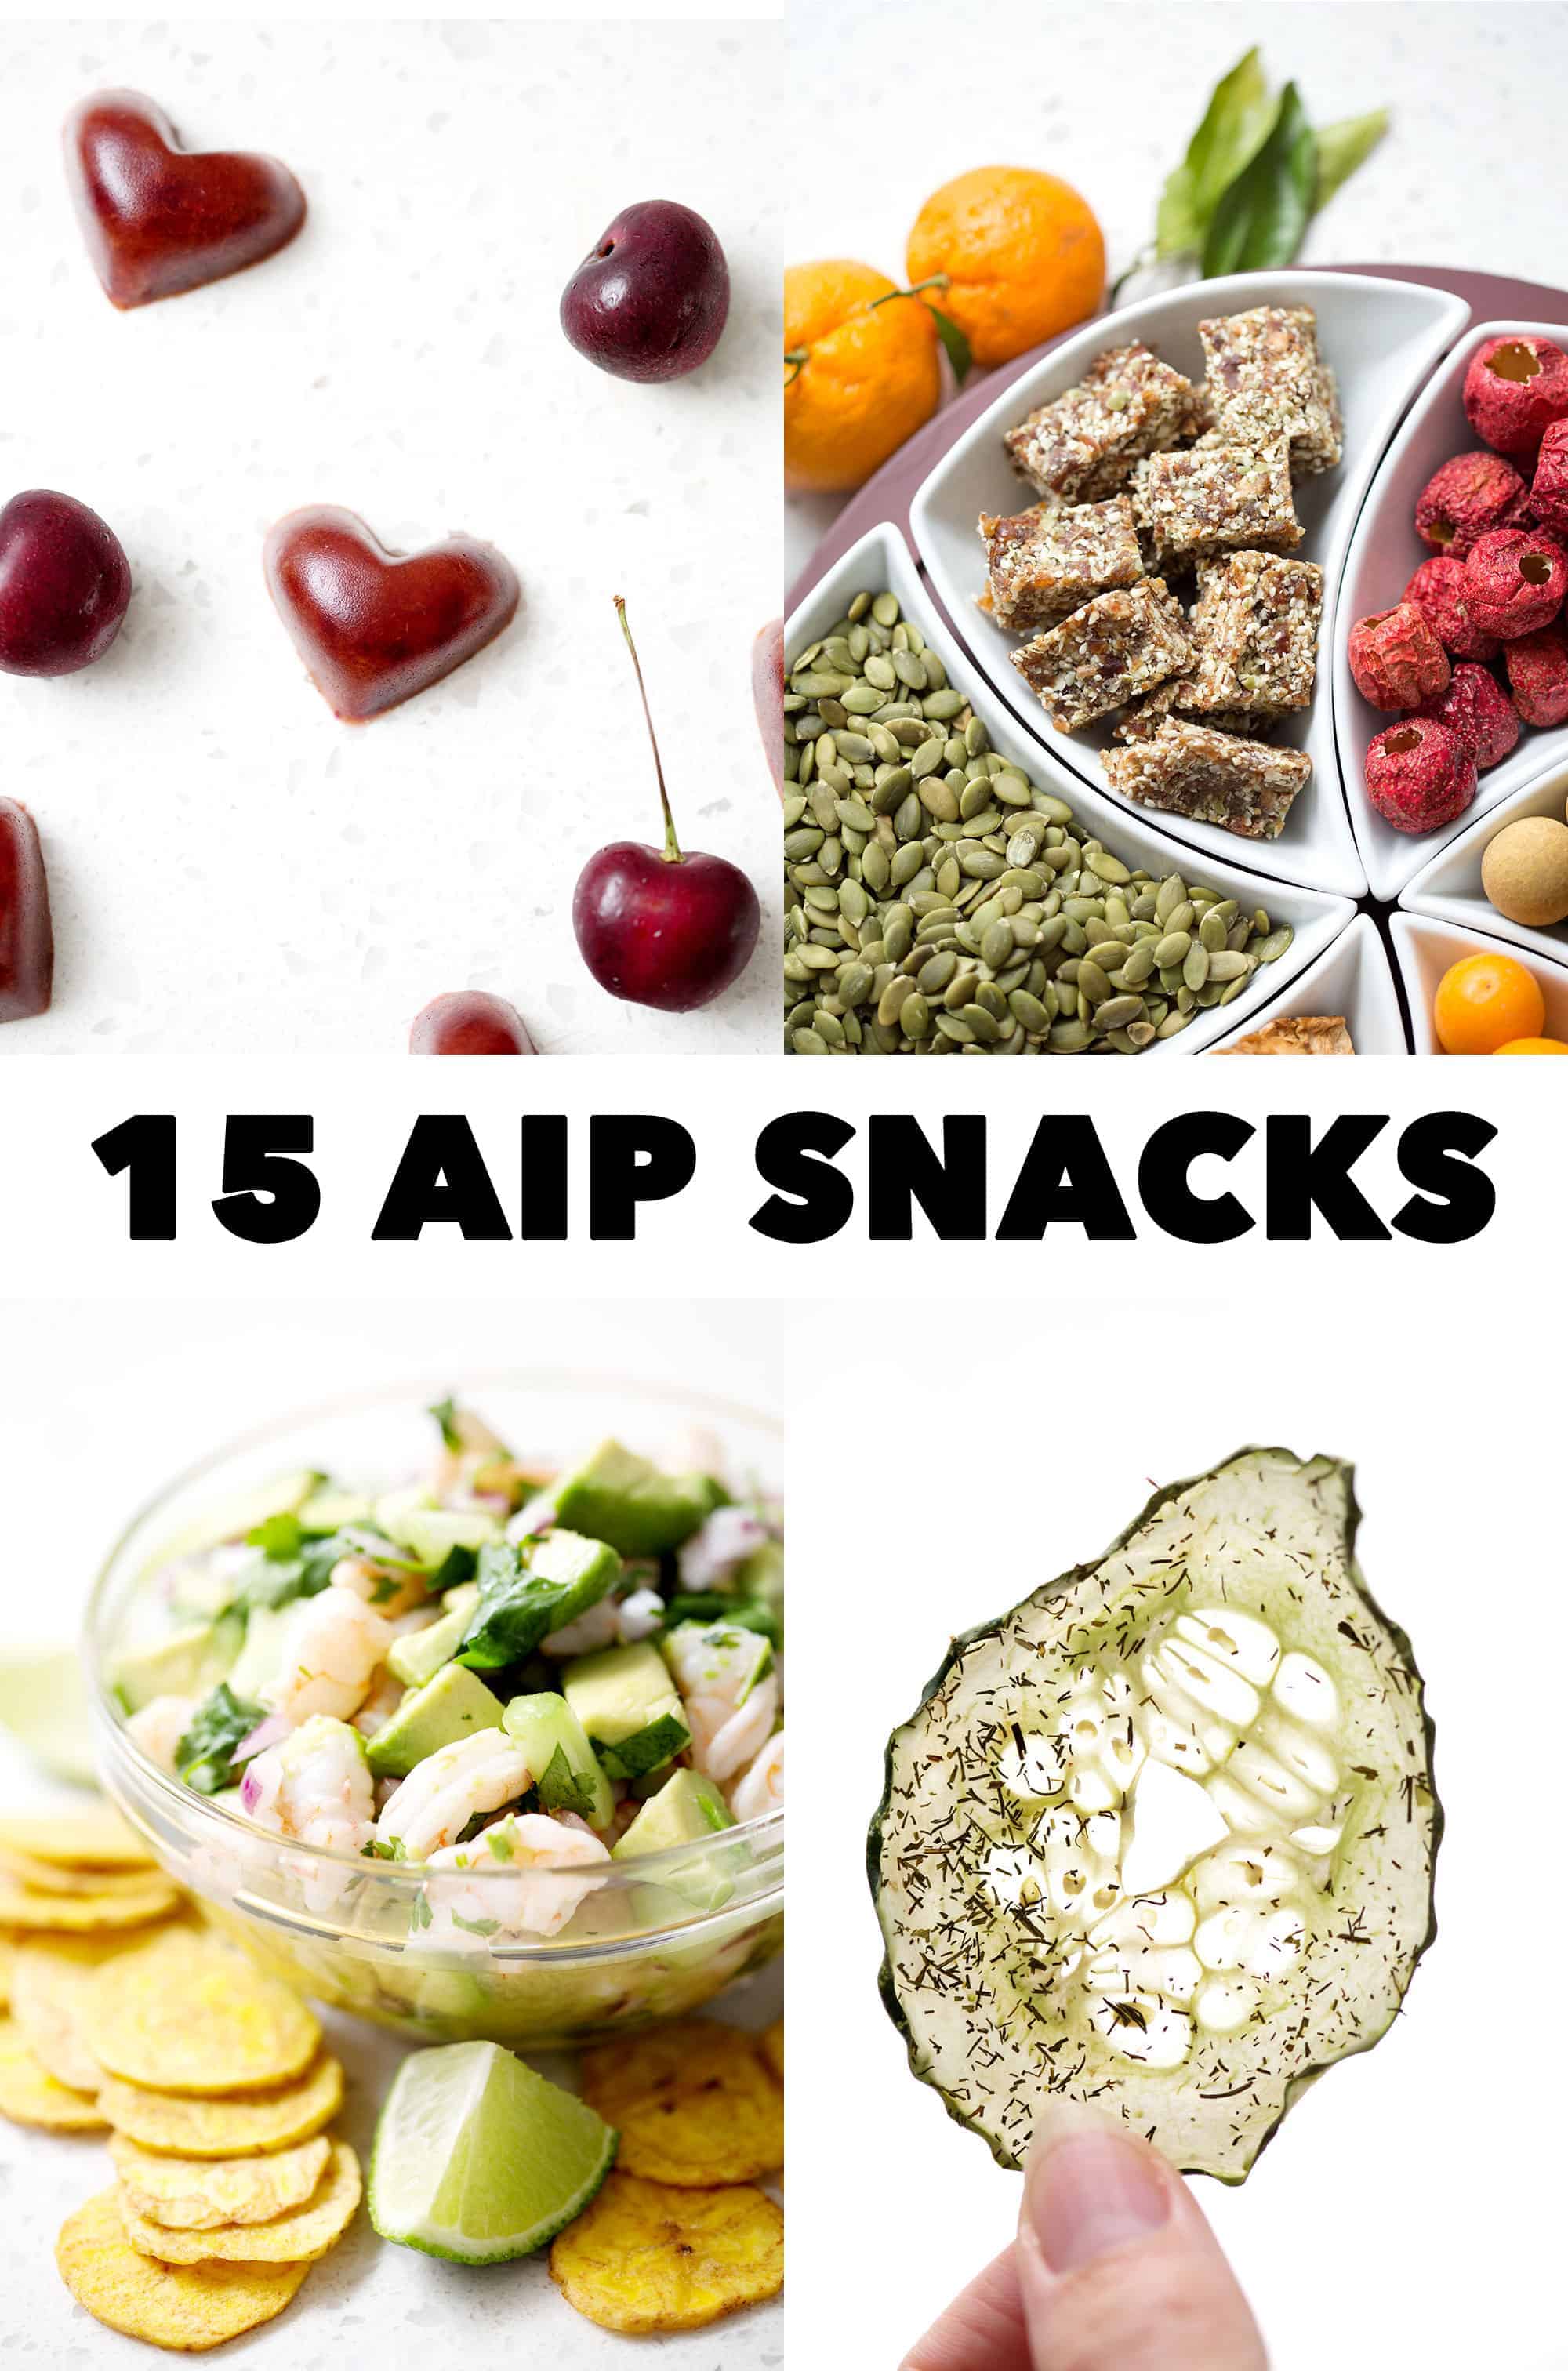 what do people snack on aip diet?